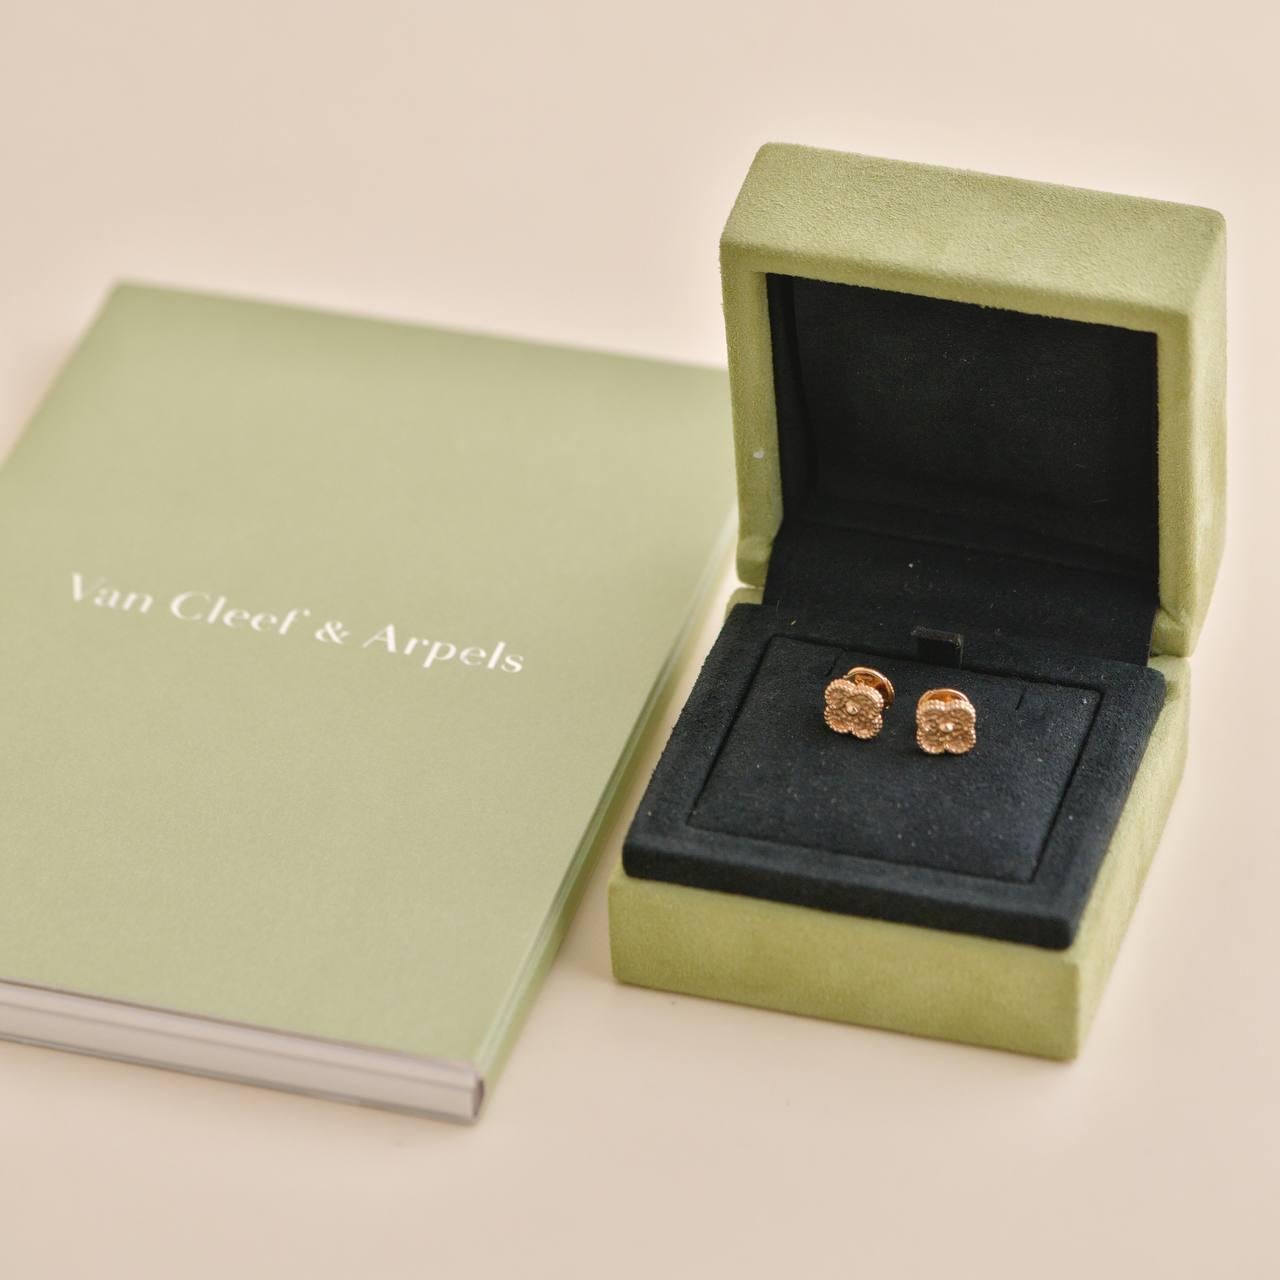 *Rare Find* Van Cleef & Arpels hammered gold earring is a rare find, this design is very durable and elegant. The piece comes with a full set: original box and card. Date 2019, looks like brand new, perfect condition. It is definitely a must-have